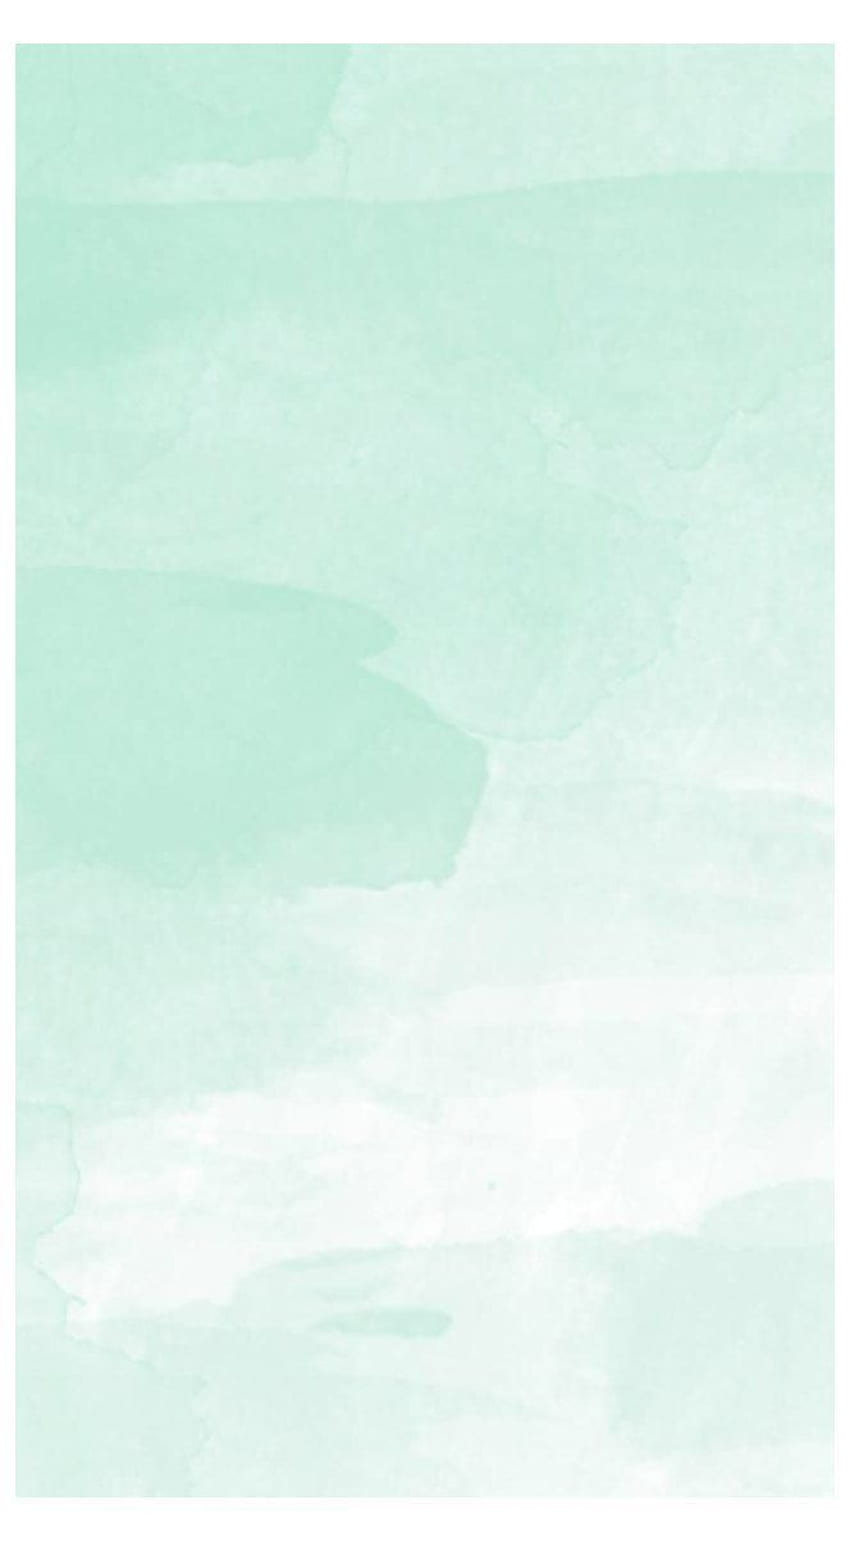 Mint Green Background For iPhone in 2021. Mint , Mint green , Mint green iphone, Aesthetic Pastel Mint HD phone wallpaper